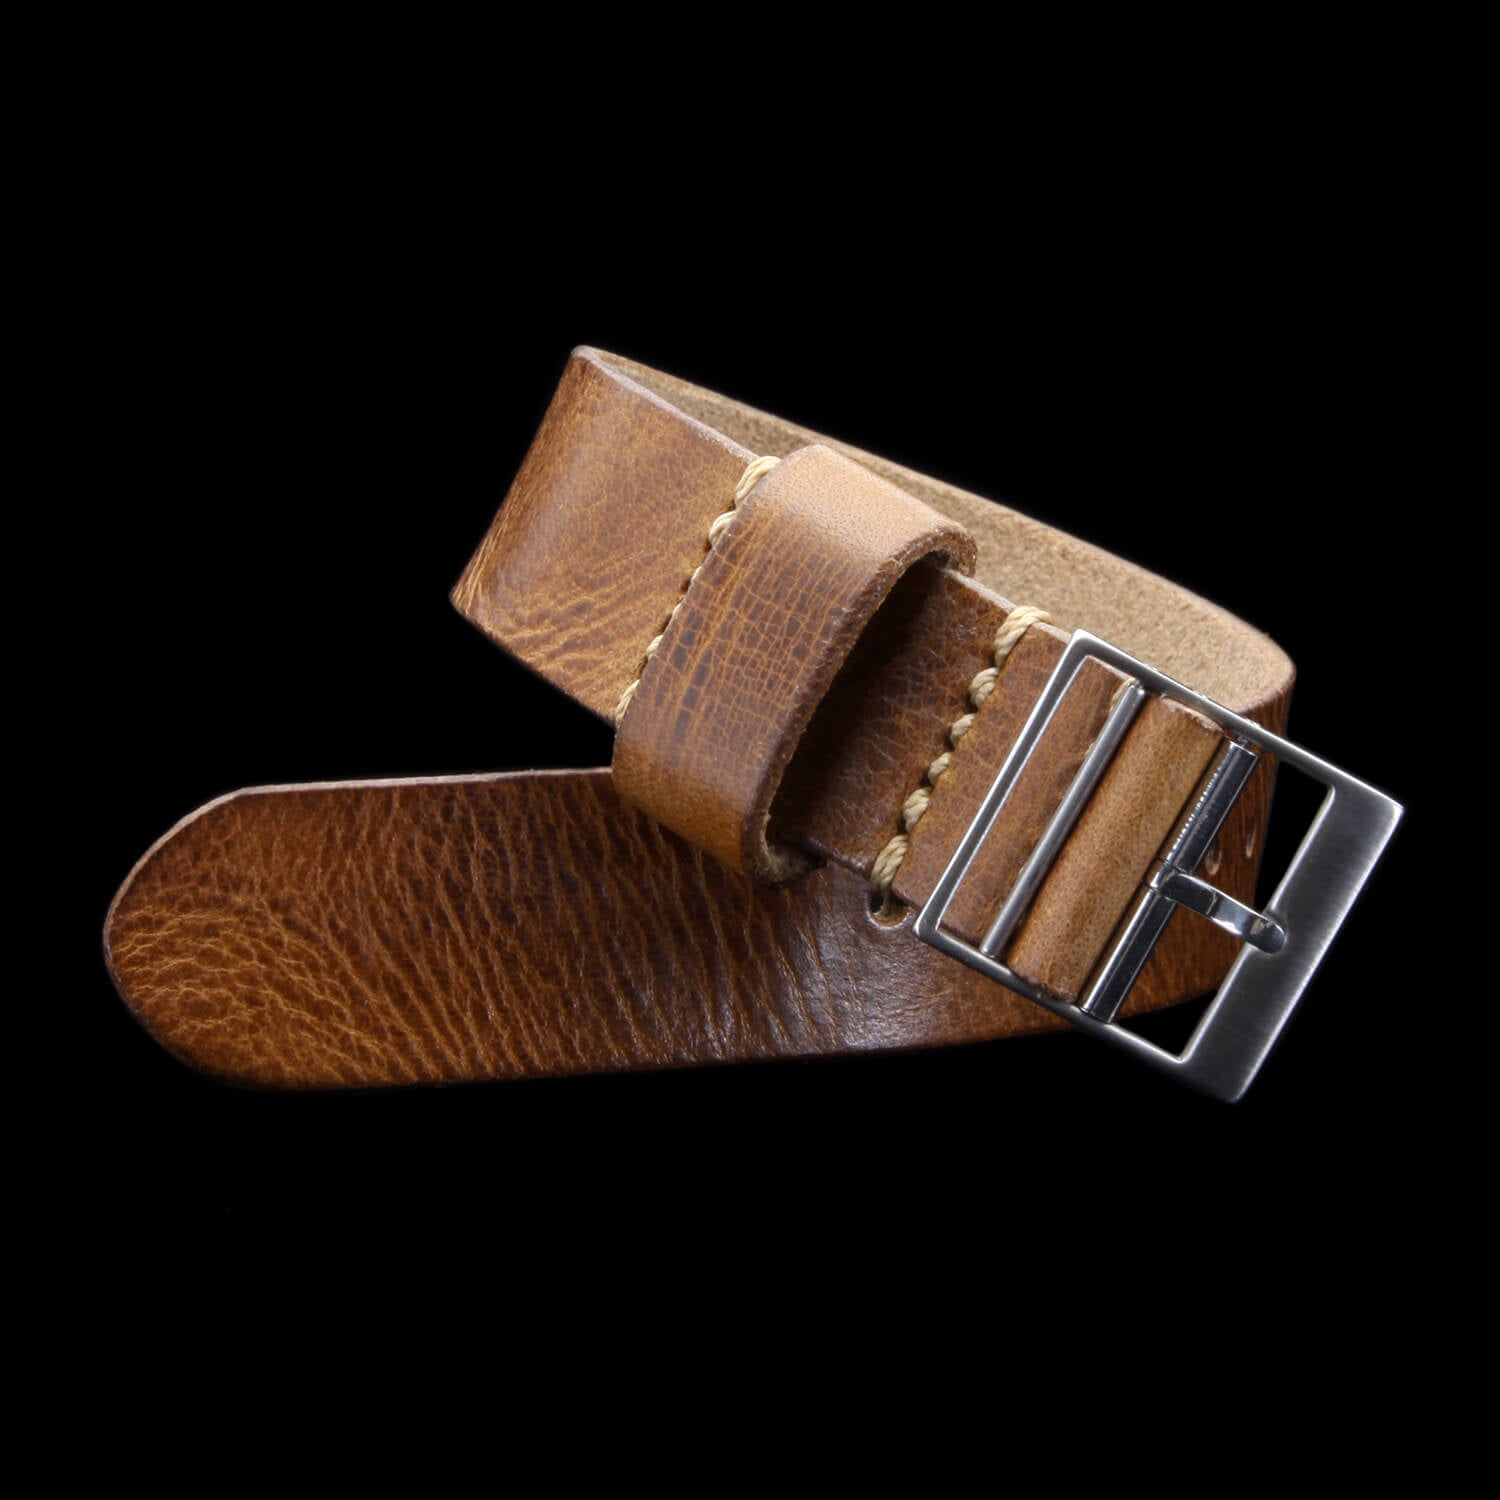 Leather Watch Strap, Classic RAF II Military 102 | Ladder Buckle | Full Grain Italian Vegetable-Tanned Leather | Cozy Handmade